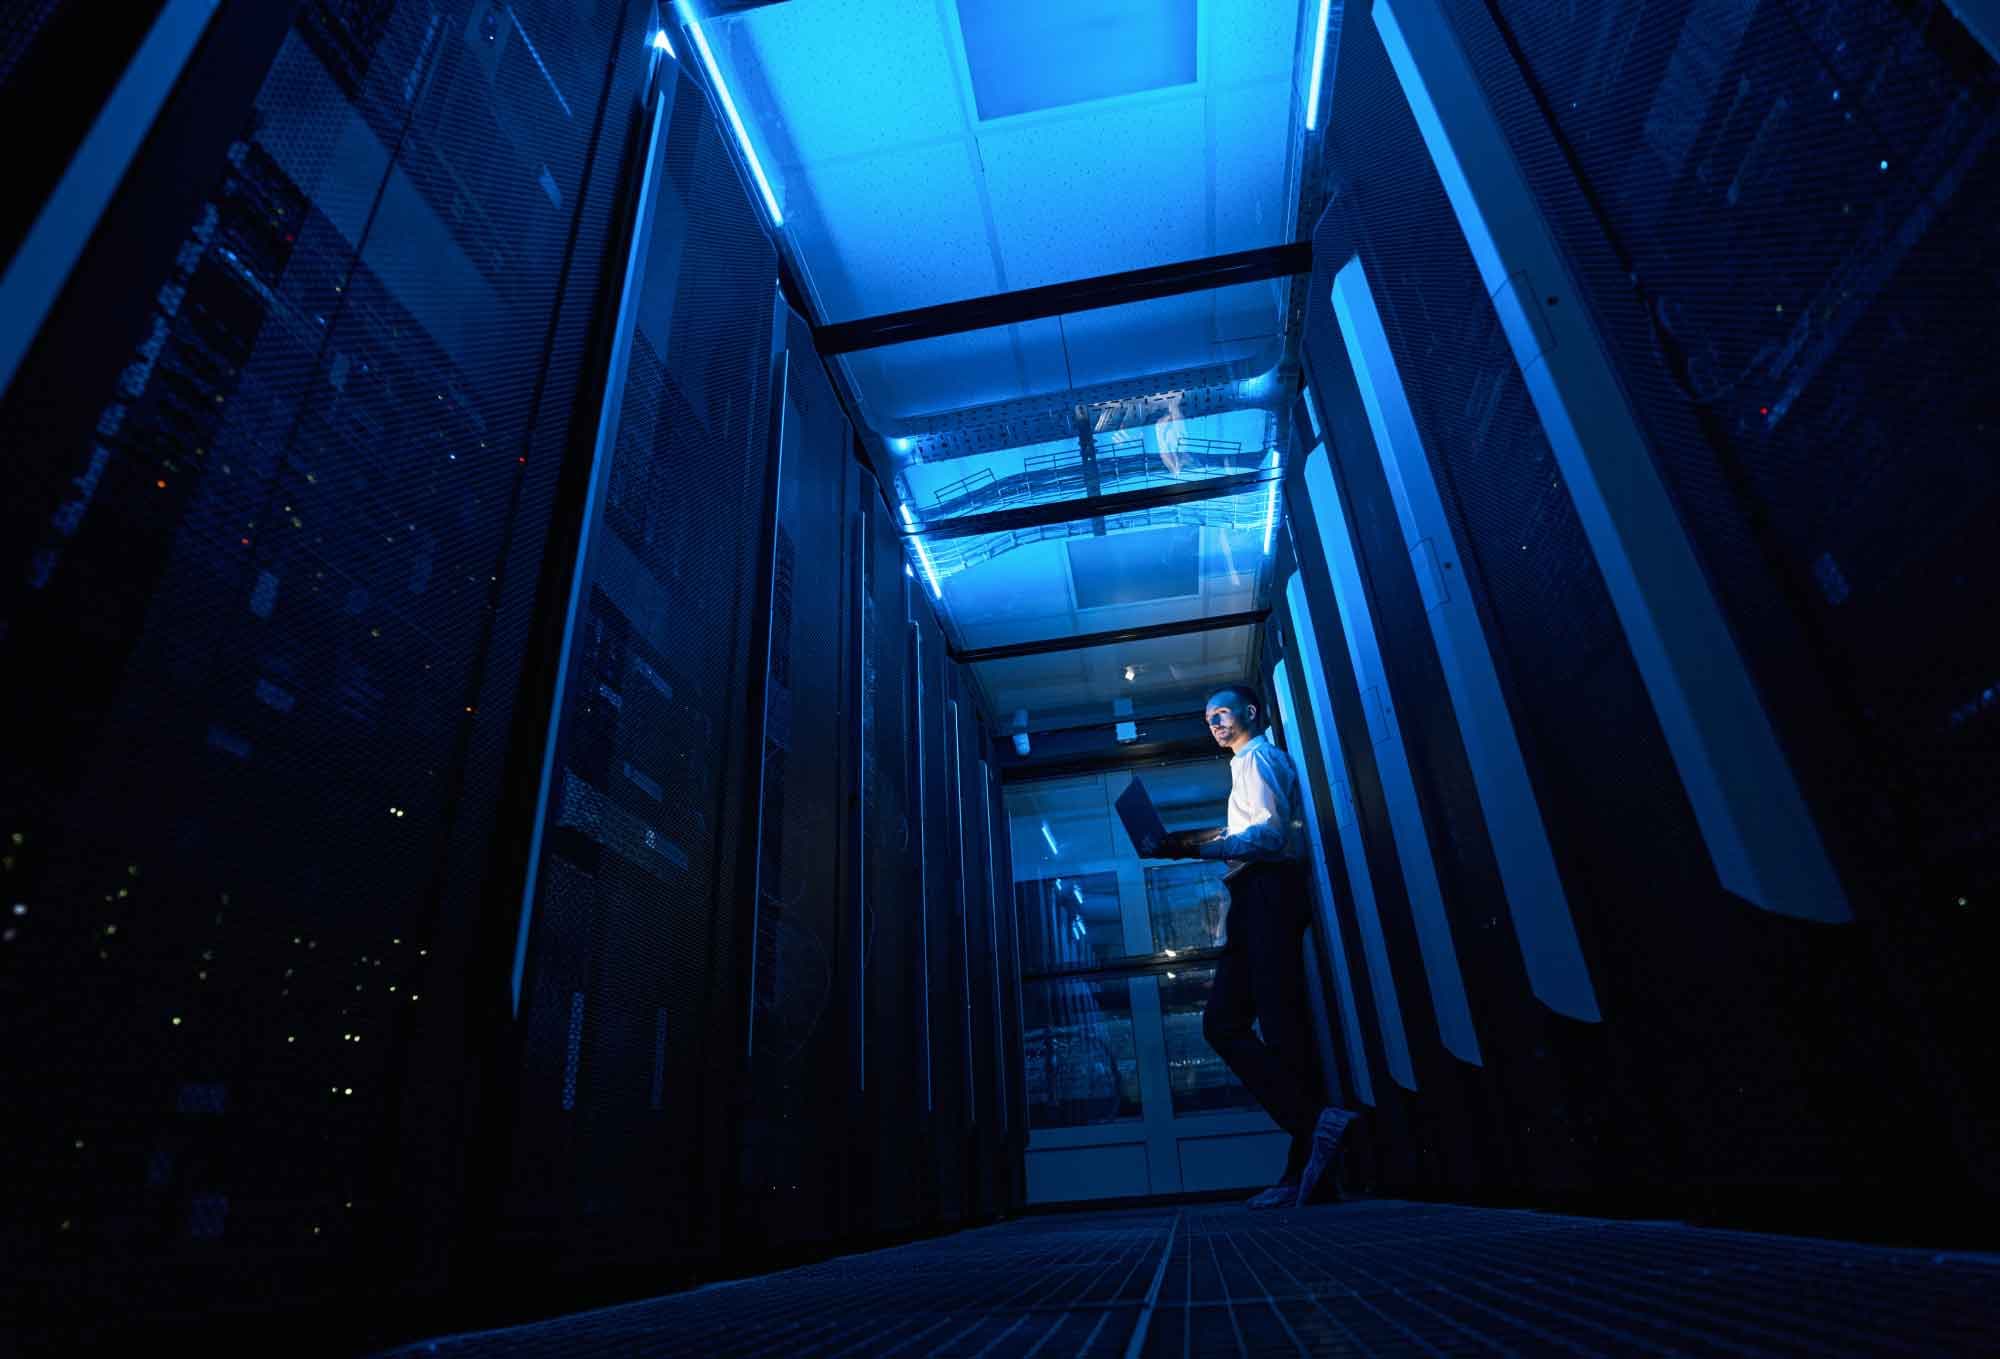 Man standing in a dark server room with ambient blue lighting| Why the break/fix model for IT is dying